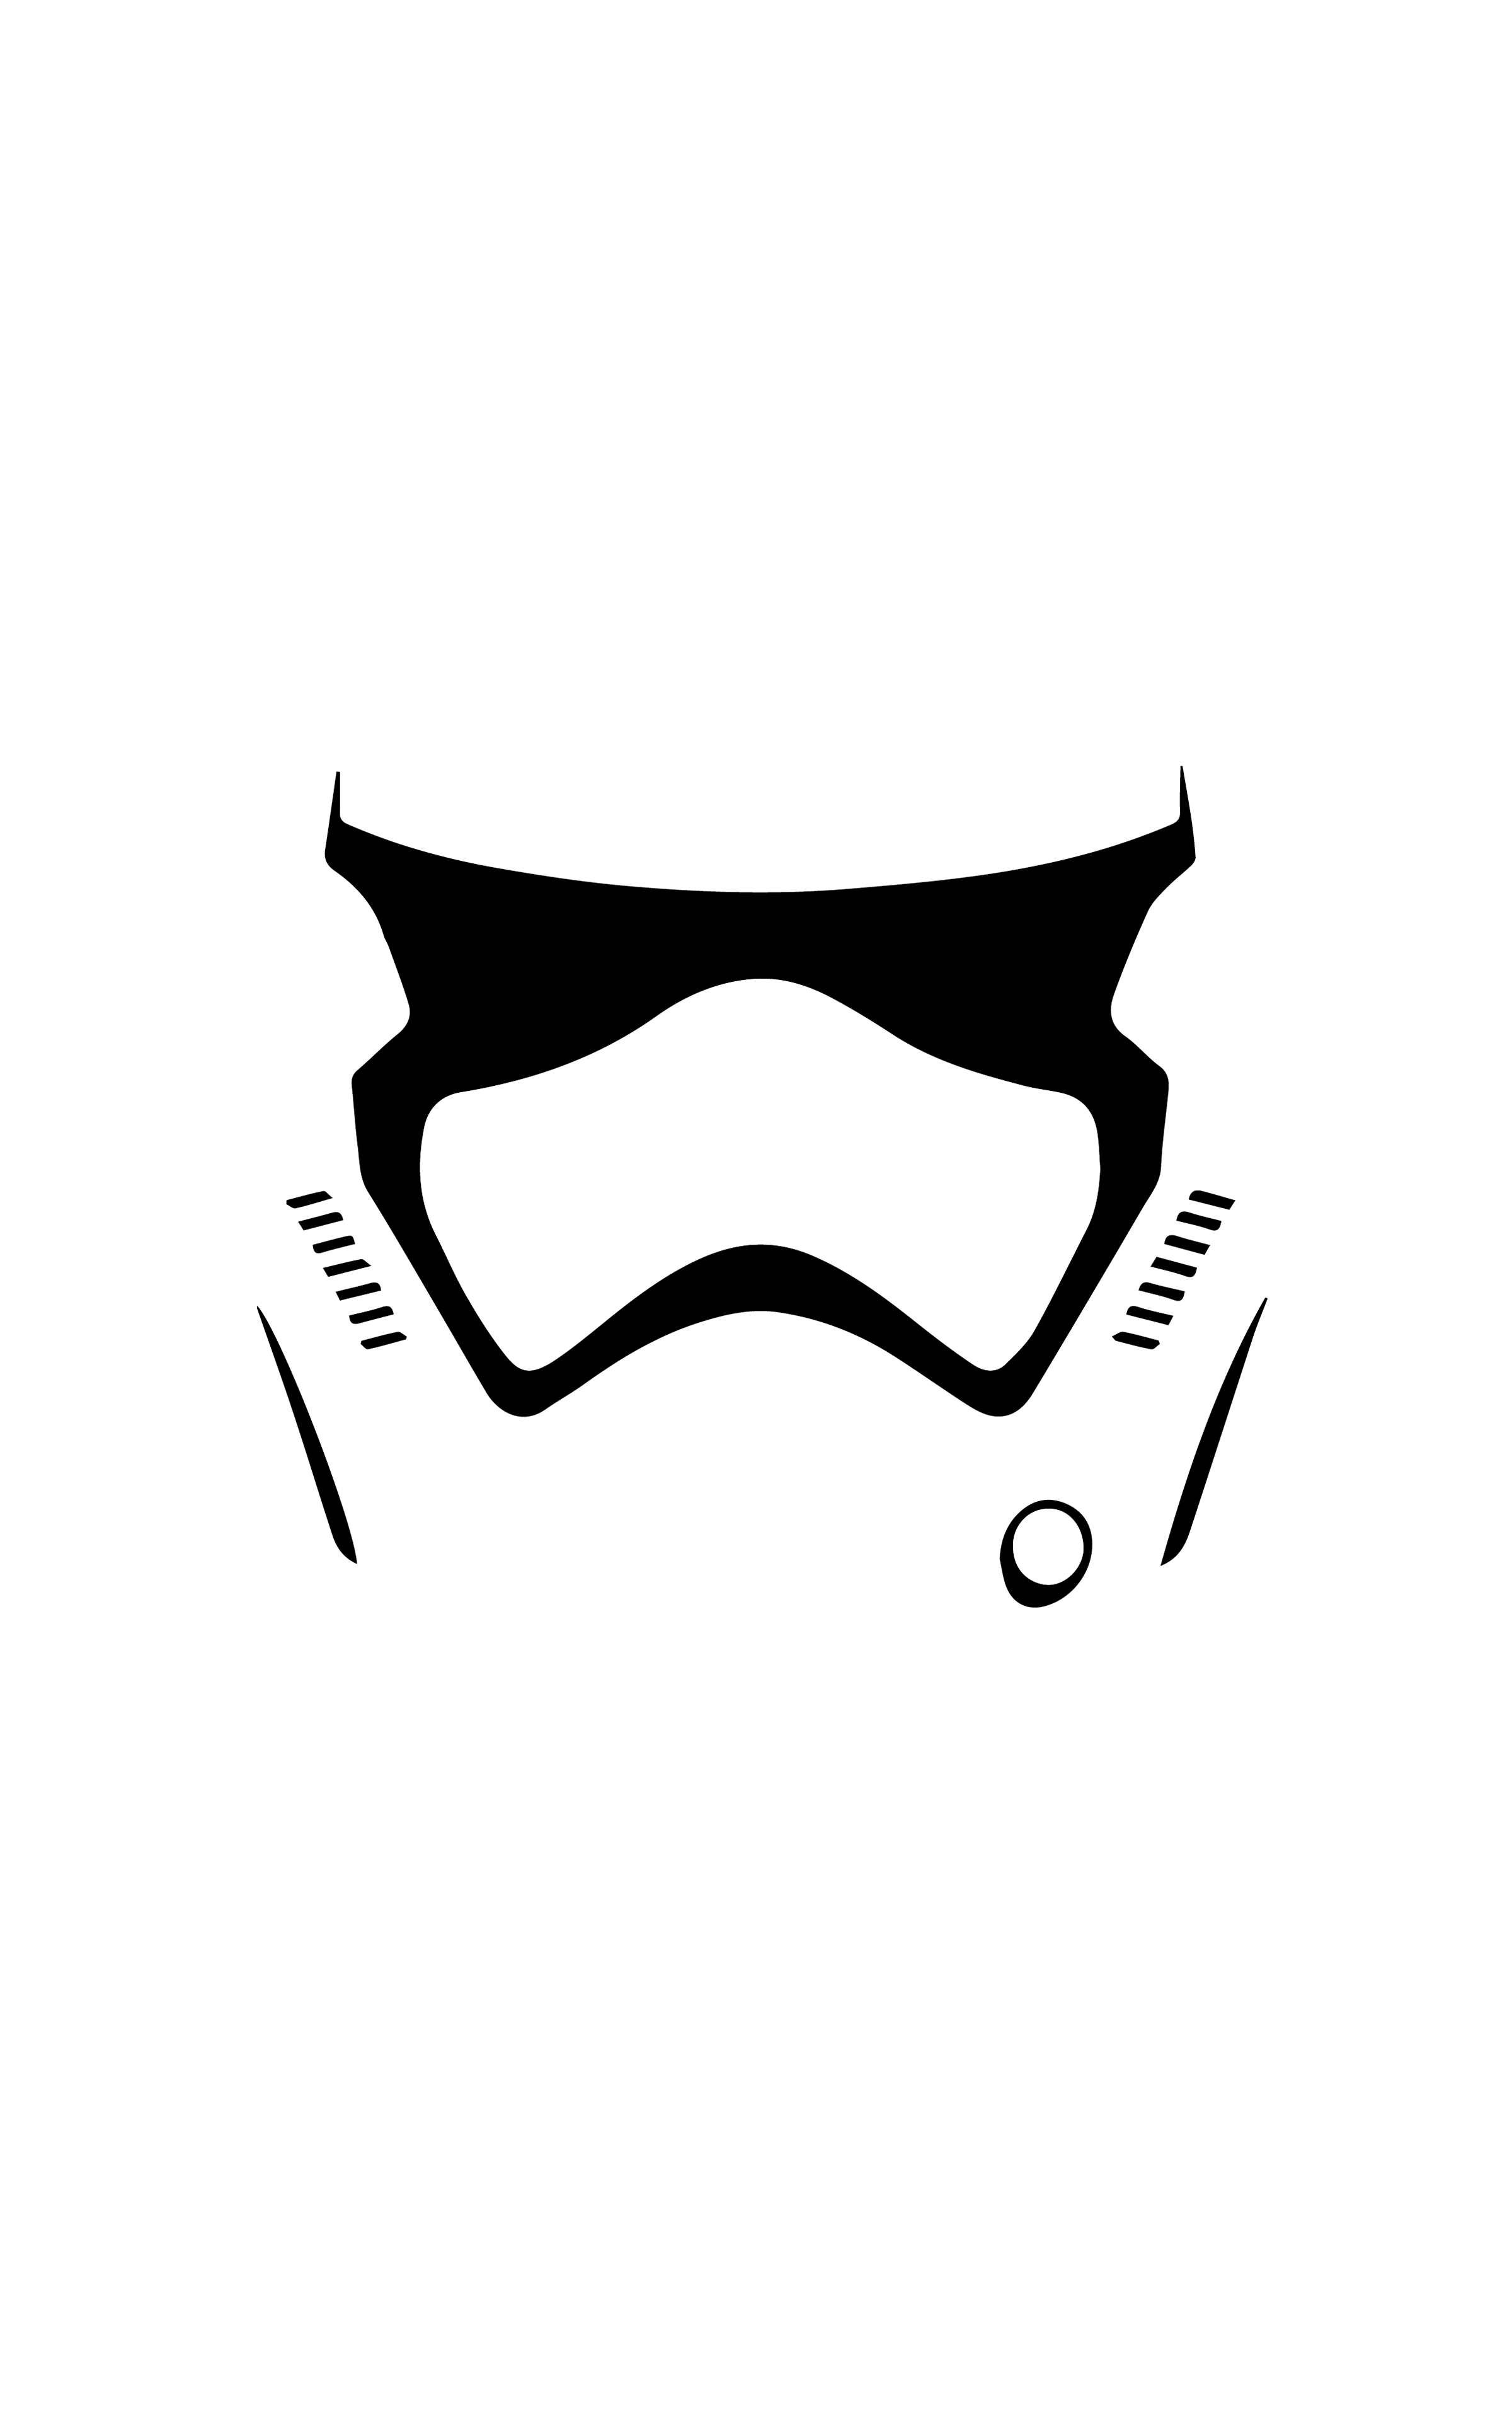 General 2400x3840 Star Wars: The Force Awakens Star Wars minimalism helmet portrait display The First Order white background simple background science fiction First Order Trooper movie characters